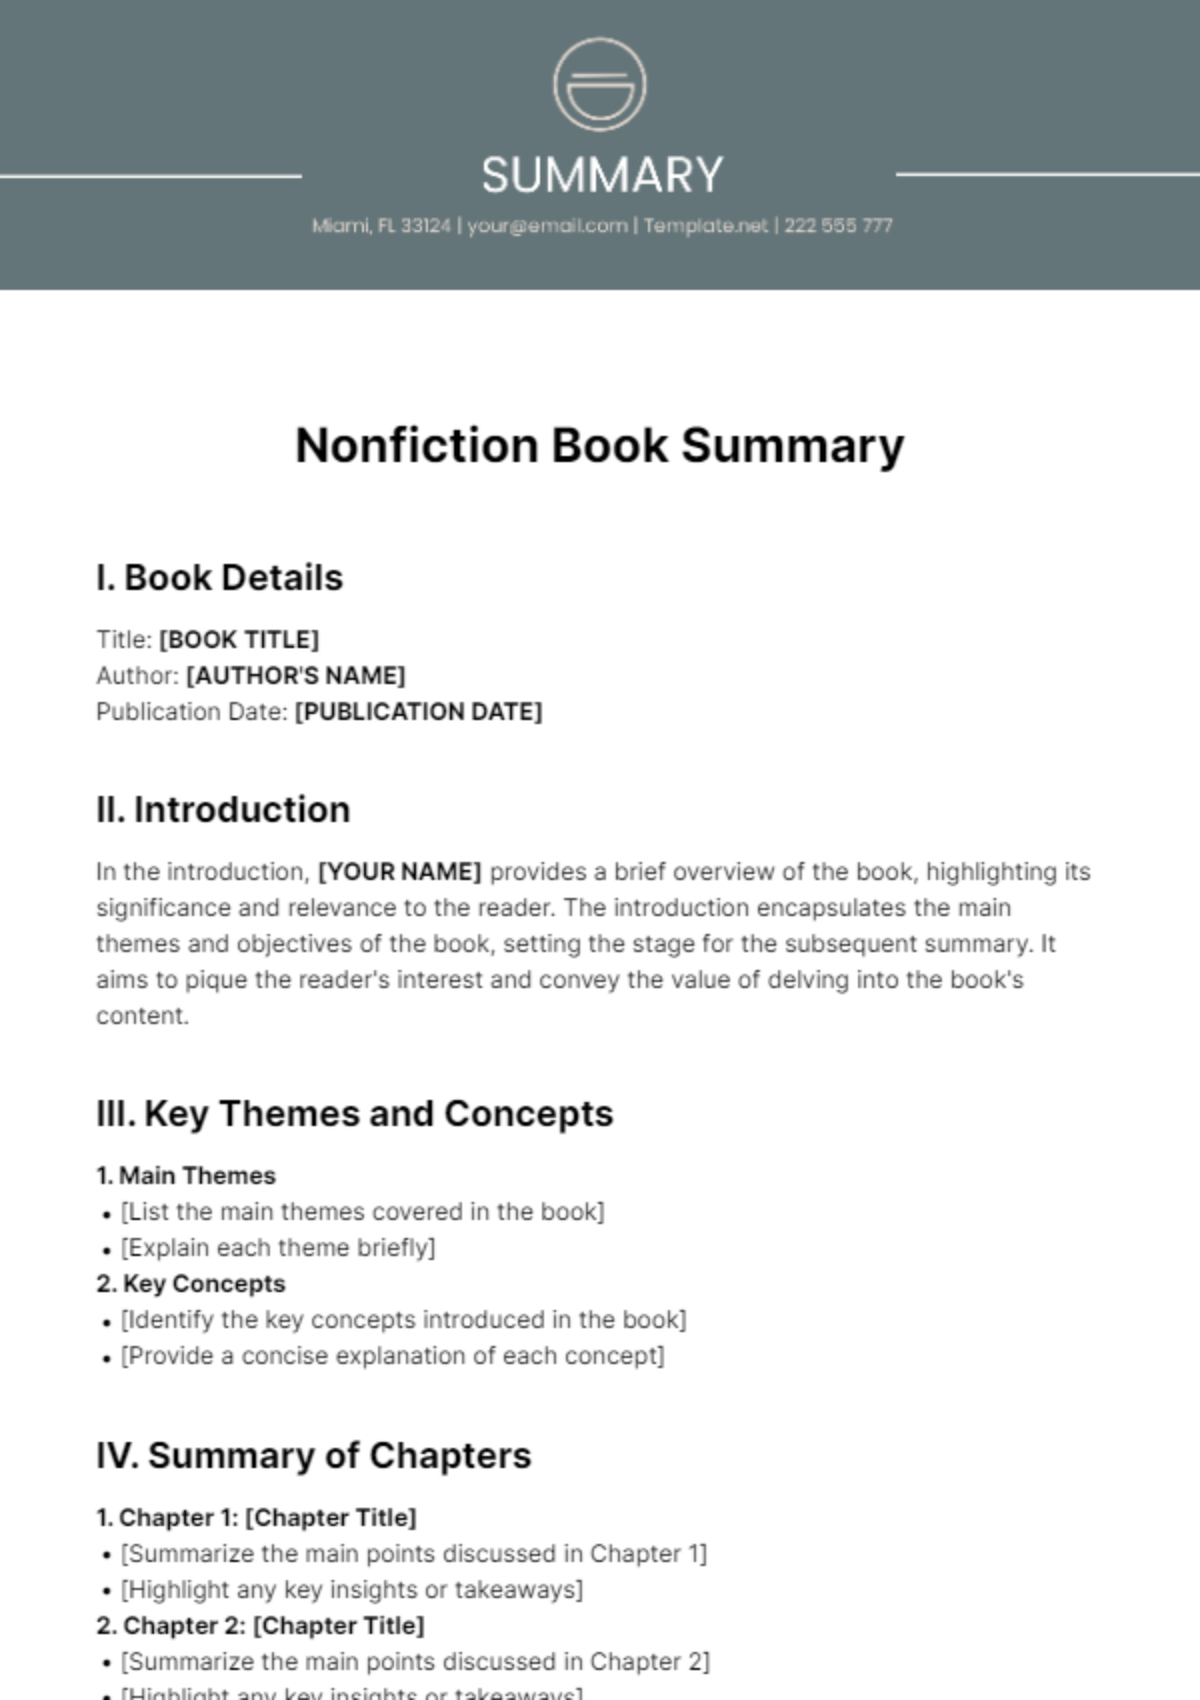 Nonfiction Book Summary Template